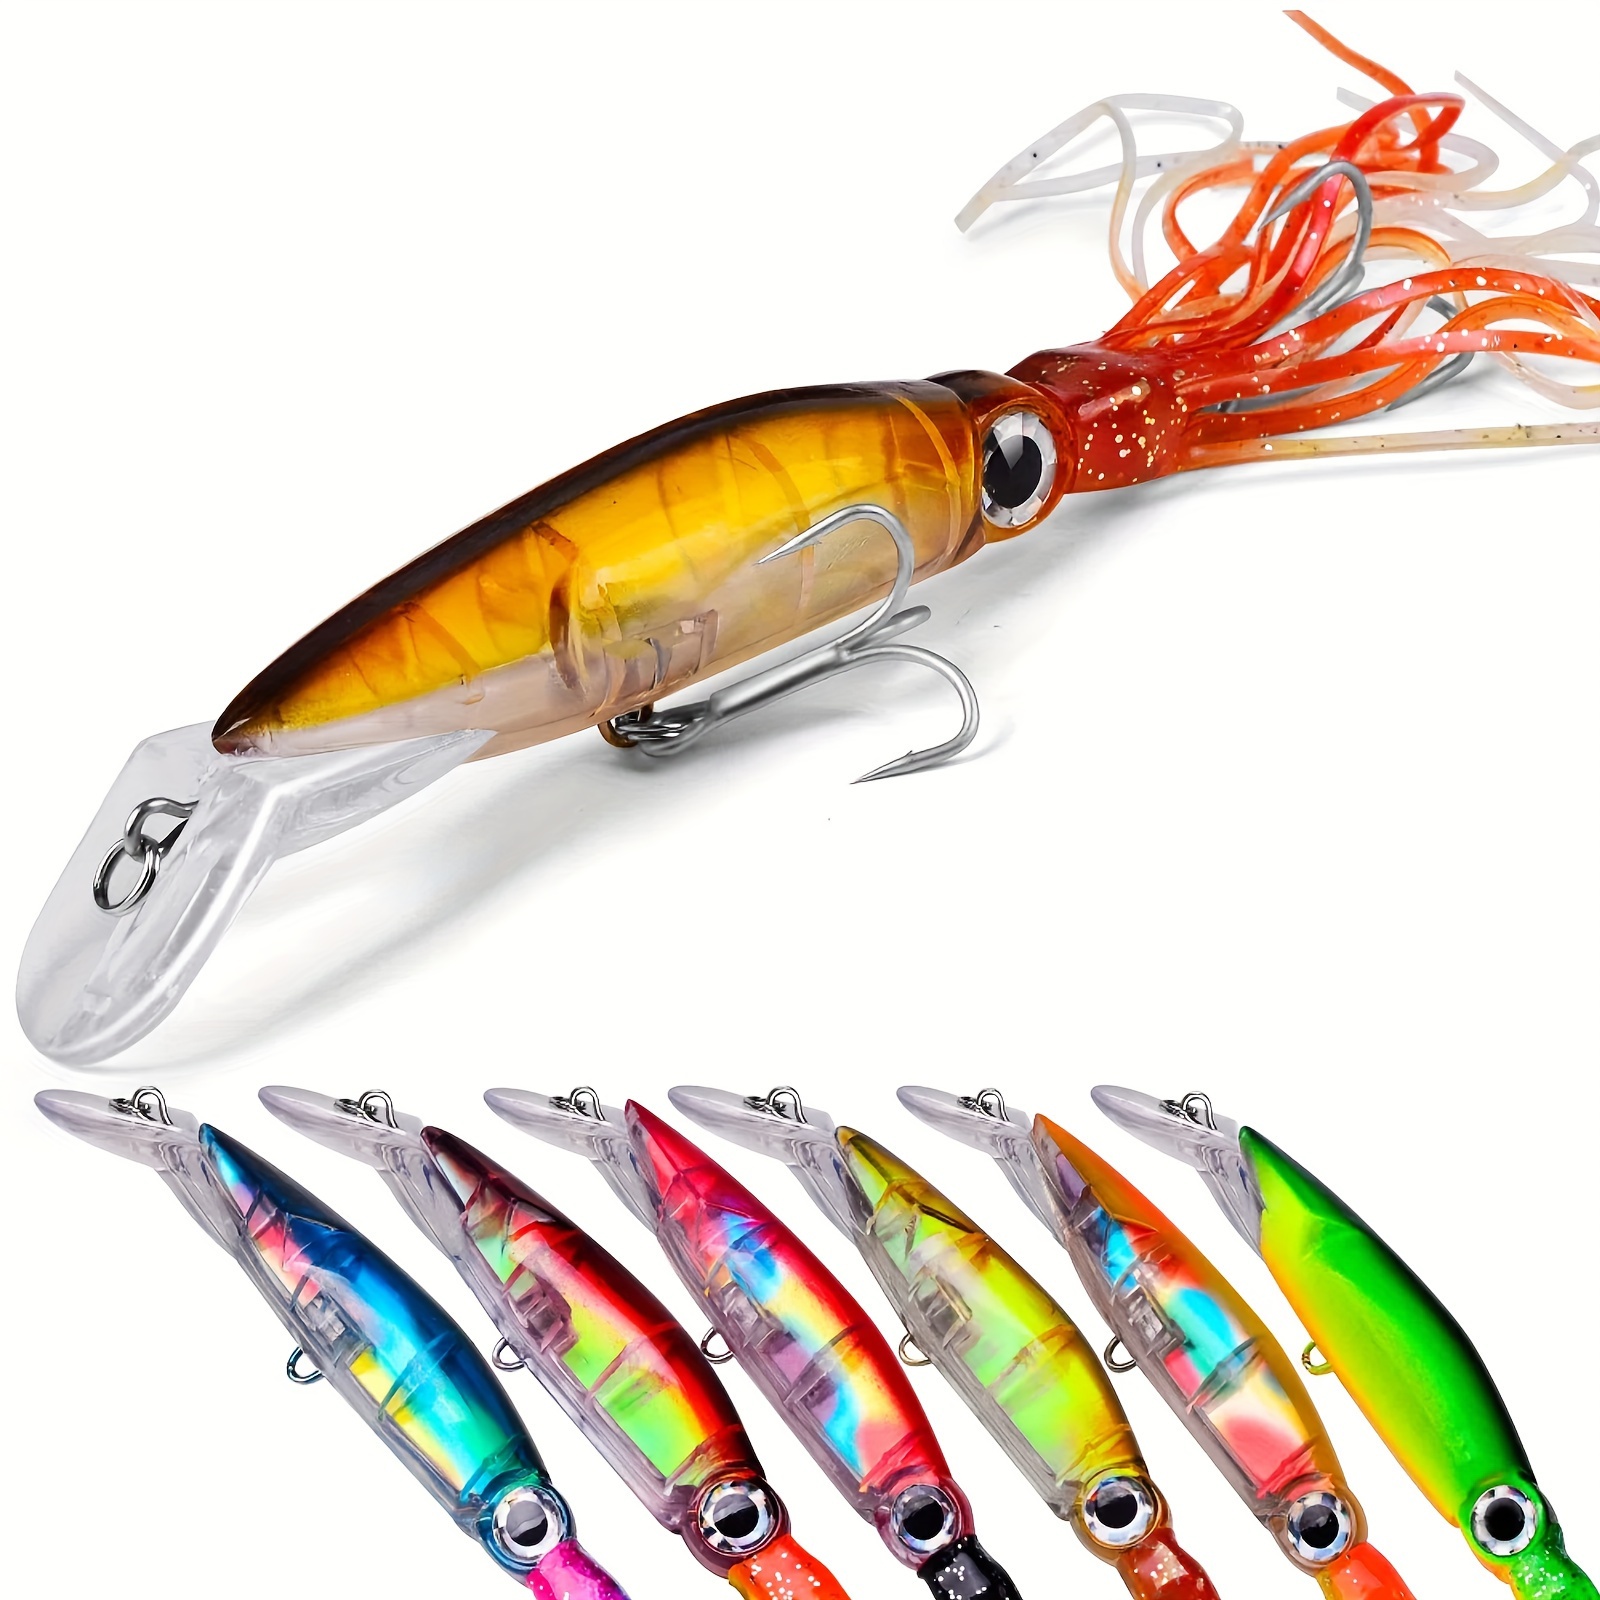 6pcs Soft Plastic Fishing Lures Saltwater Glow Squid Skirts Hoochie Lures  with Assist Hooks & Built-in Lead Jig 4.3inch/0.78oz Octopus Hoochies  Swimbait for Trolling, Salmon, Bass, Trout Fishing, Soft Plastic Lures 